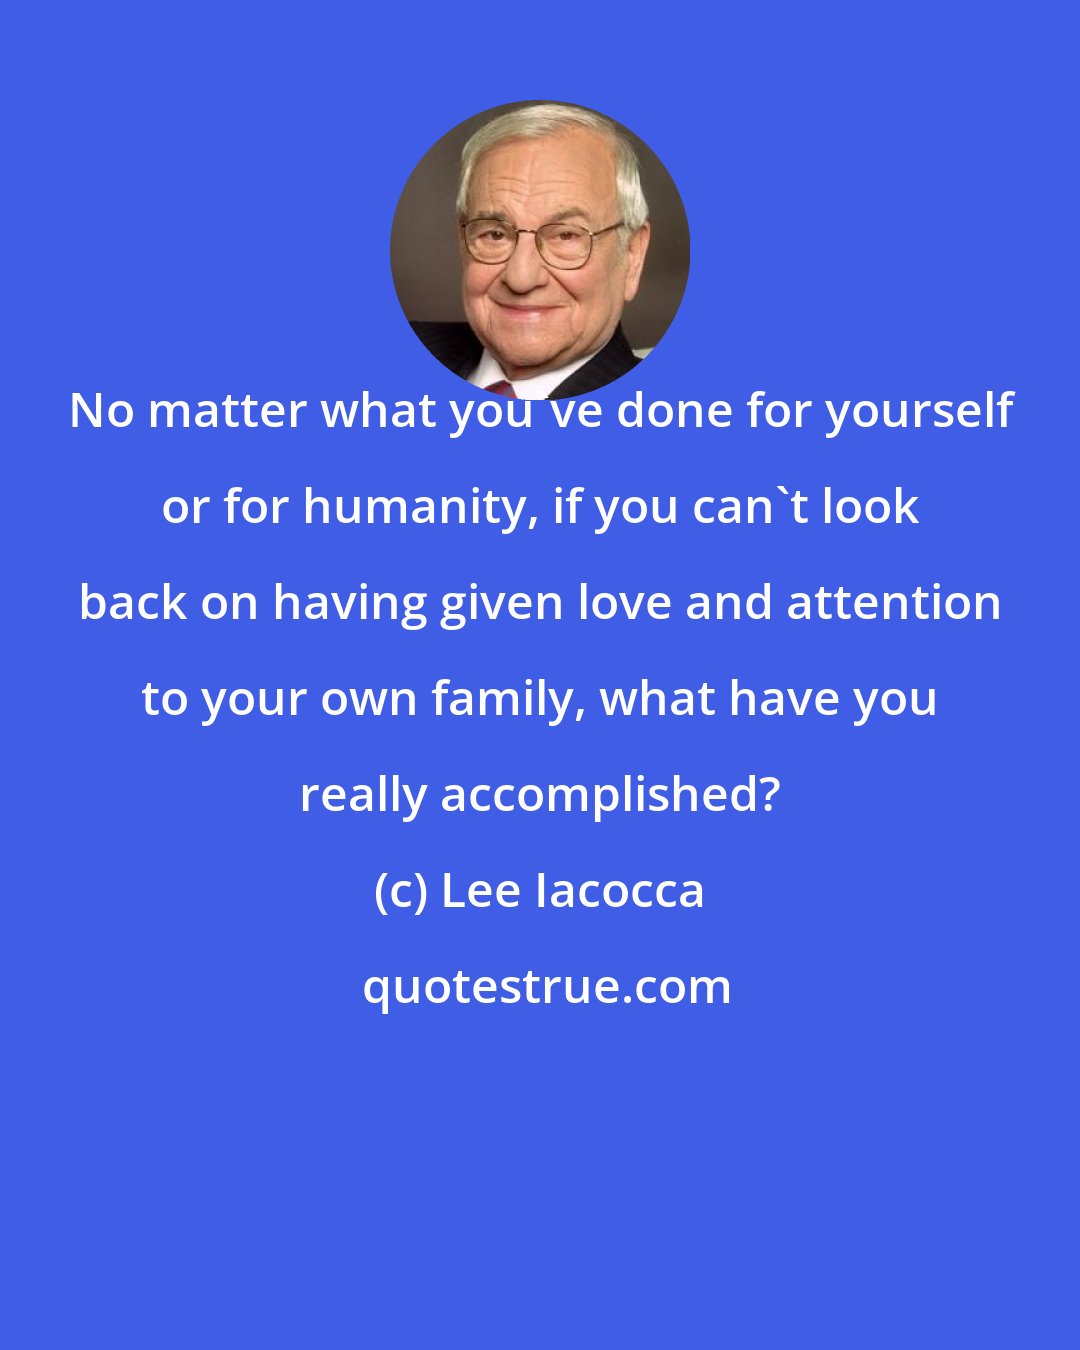 Lee Iacocca: No matter what you've done for yourself or for humanity, if you can't look back on having given love and attention to your own family, what have you really accomplished?